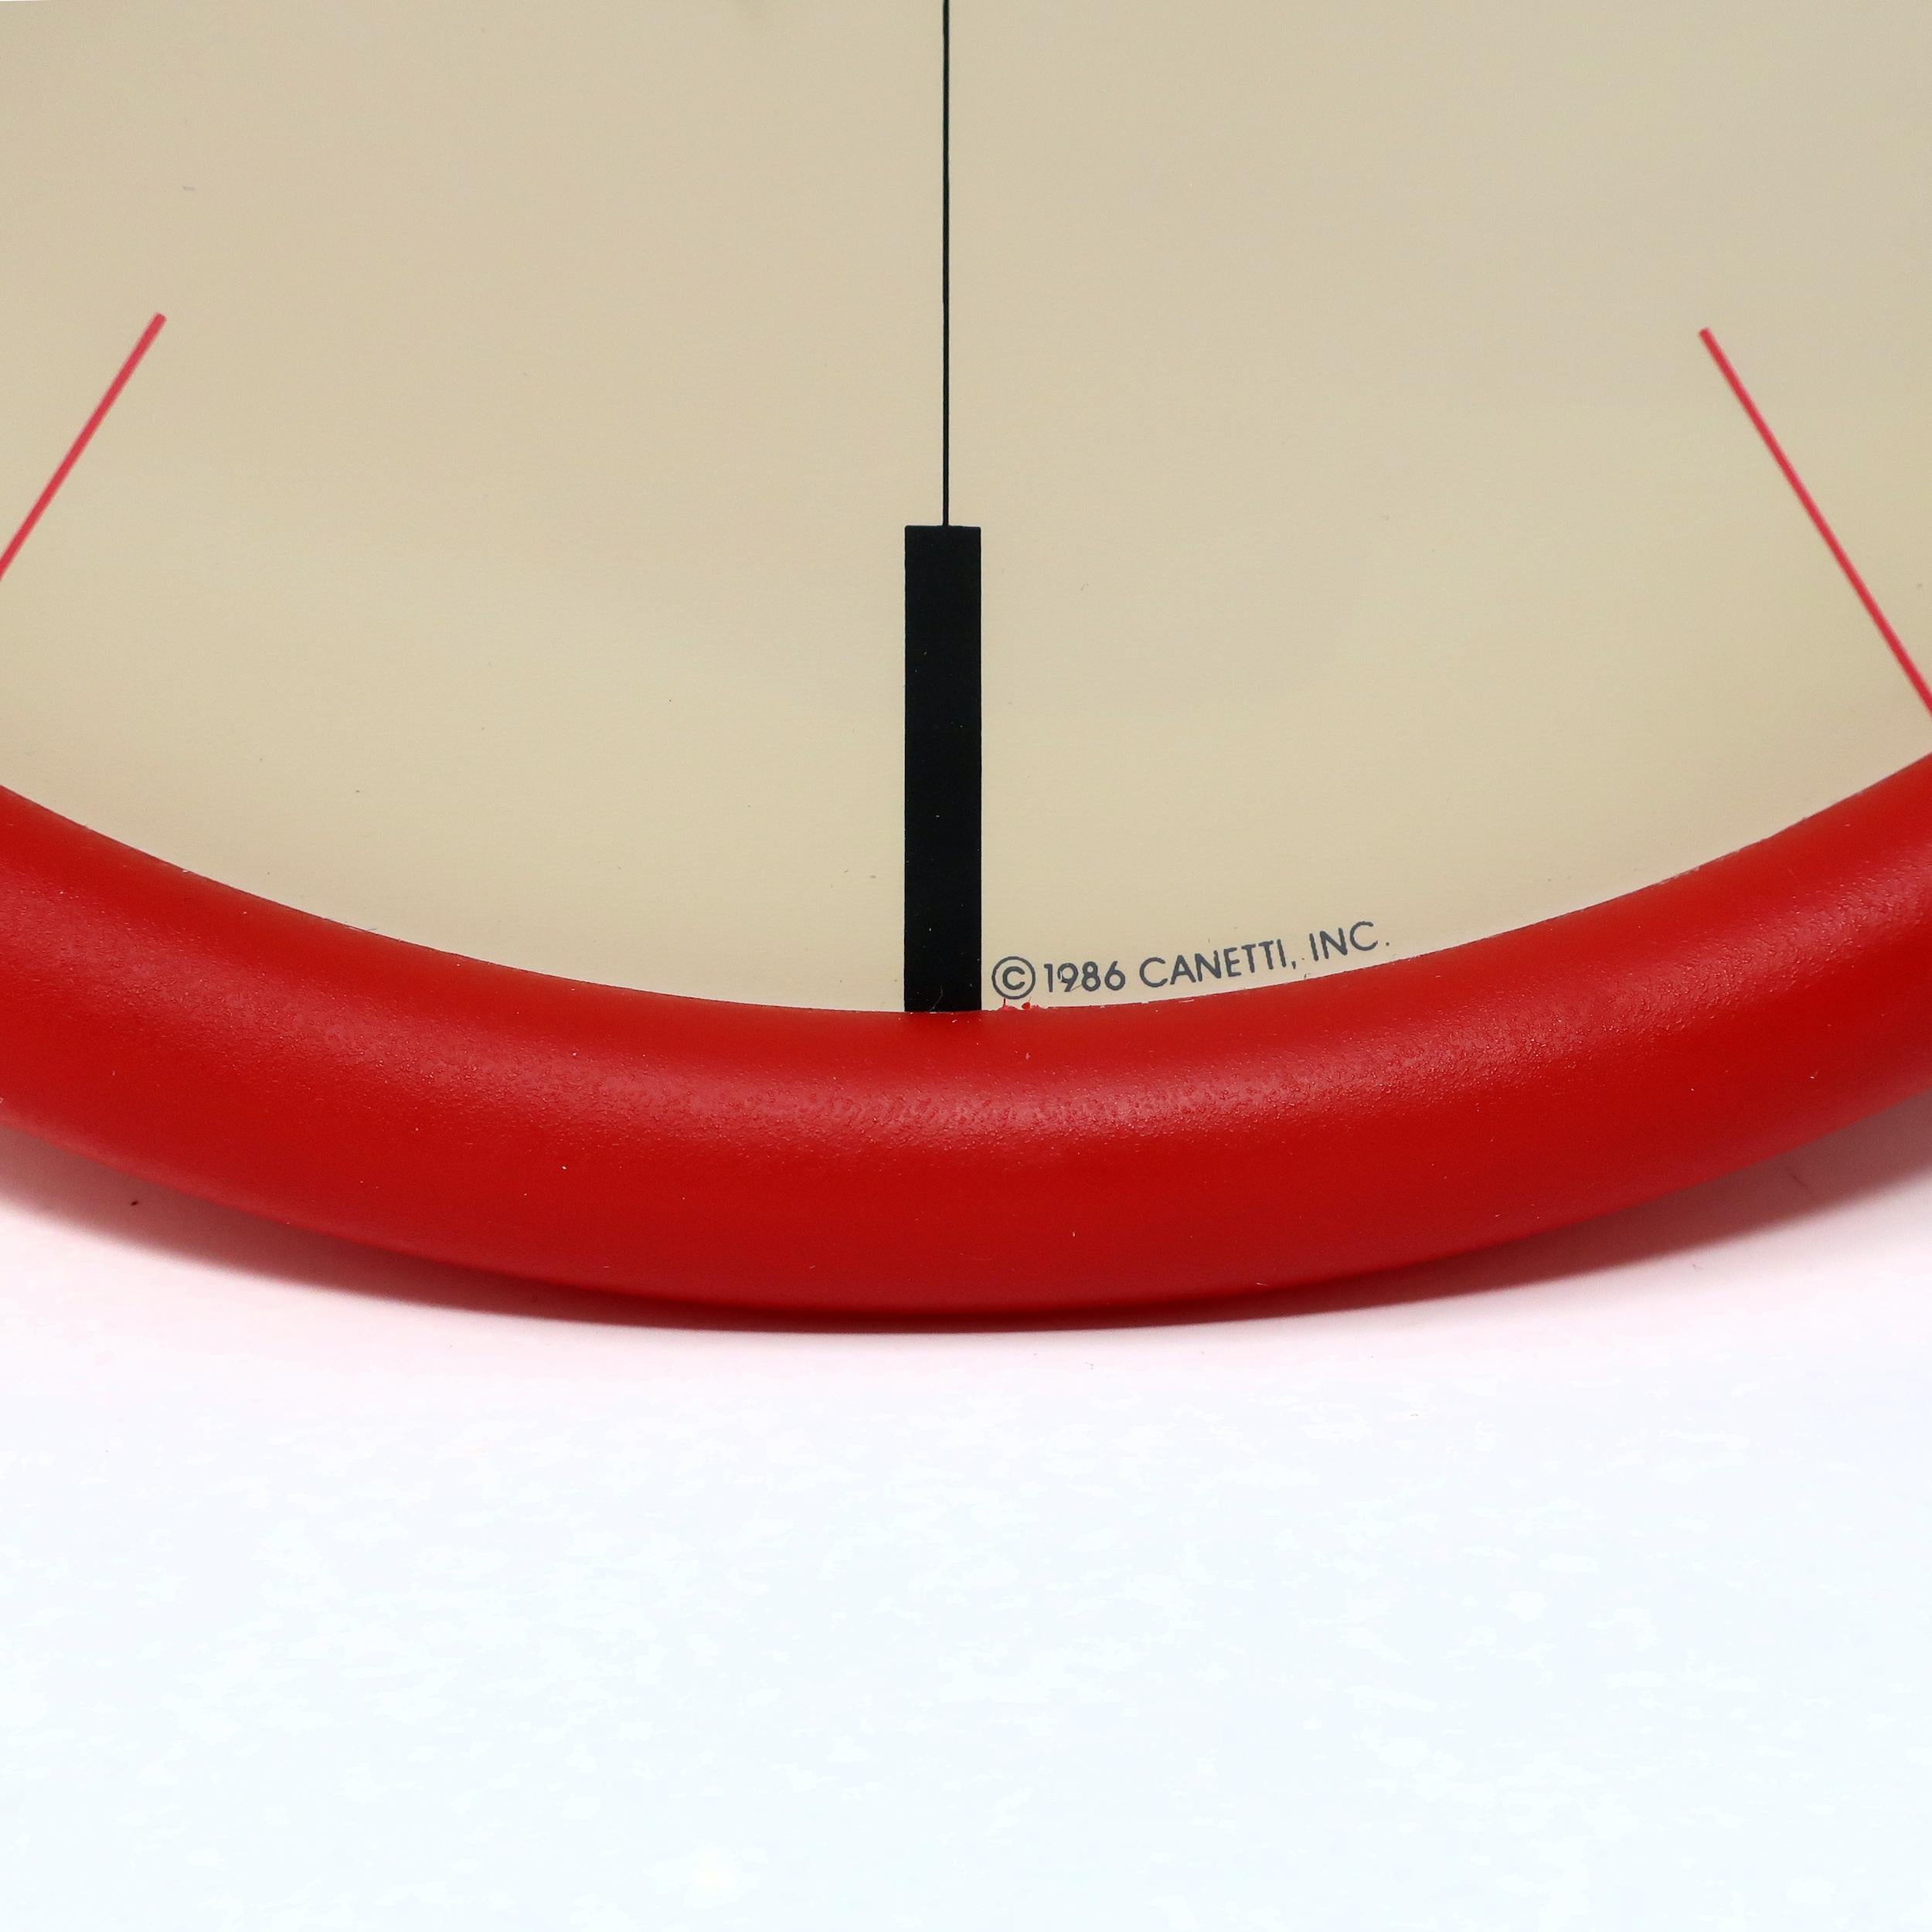 20th Century 1980s Postmodern Red Canetti Wall Clock